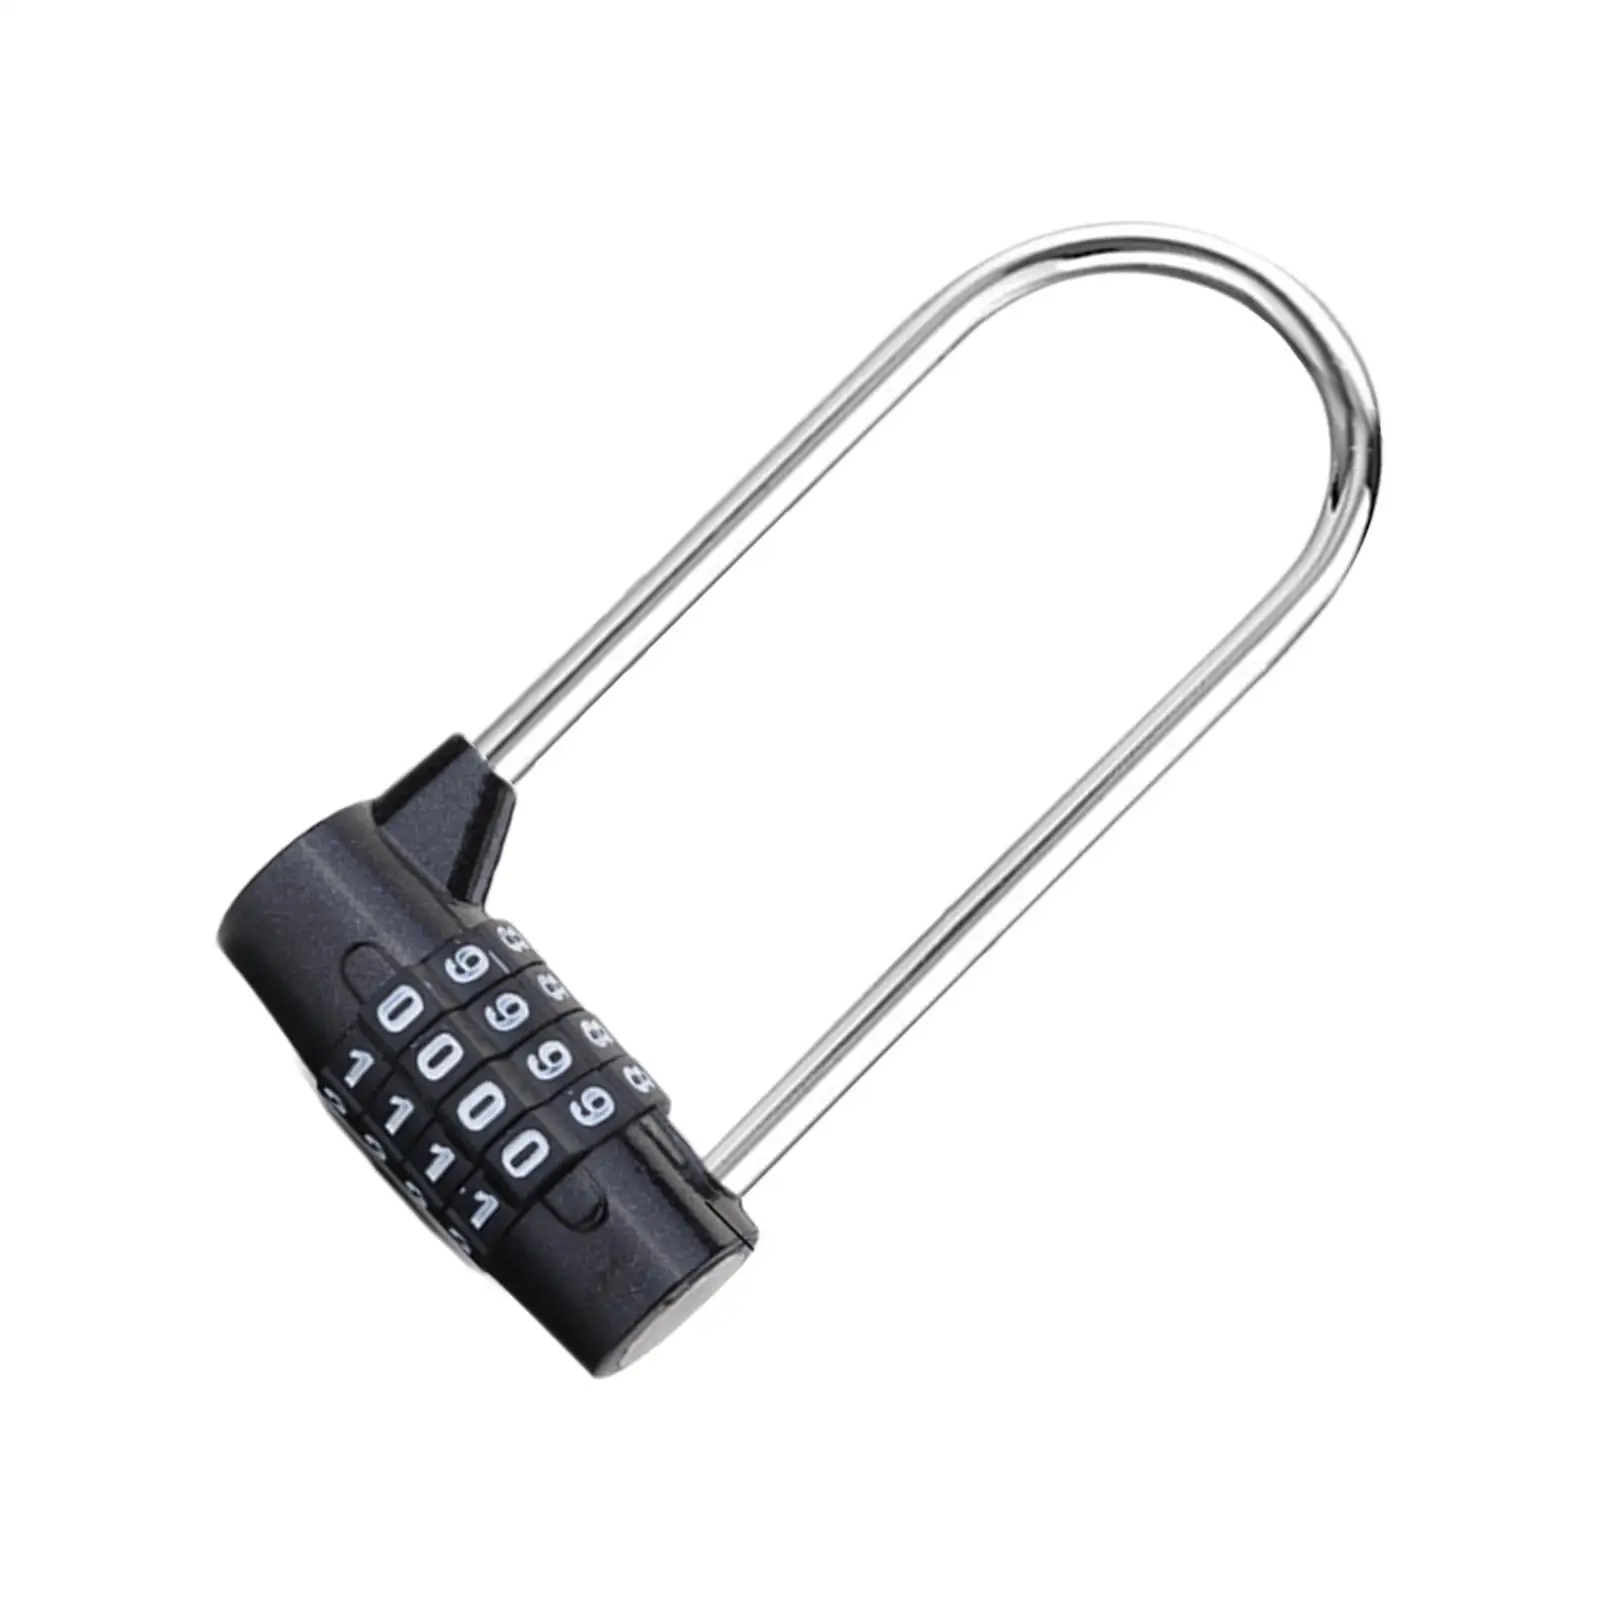 4 Digit Combination Lock Outdoor Safety Lock Lengthened Shackle Lock Resettable Code Pad Lock for Bicycle Hasp Cabinet Fence